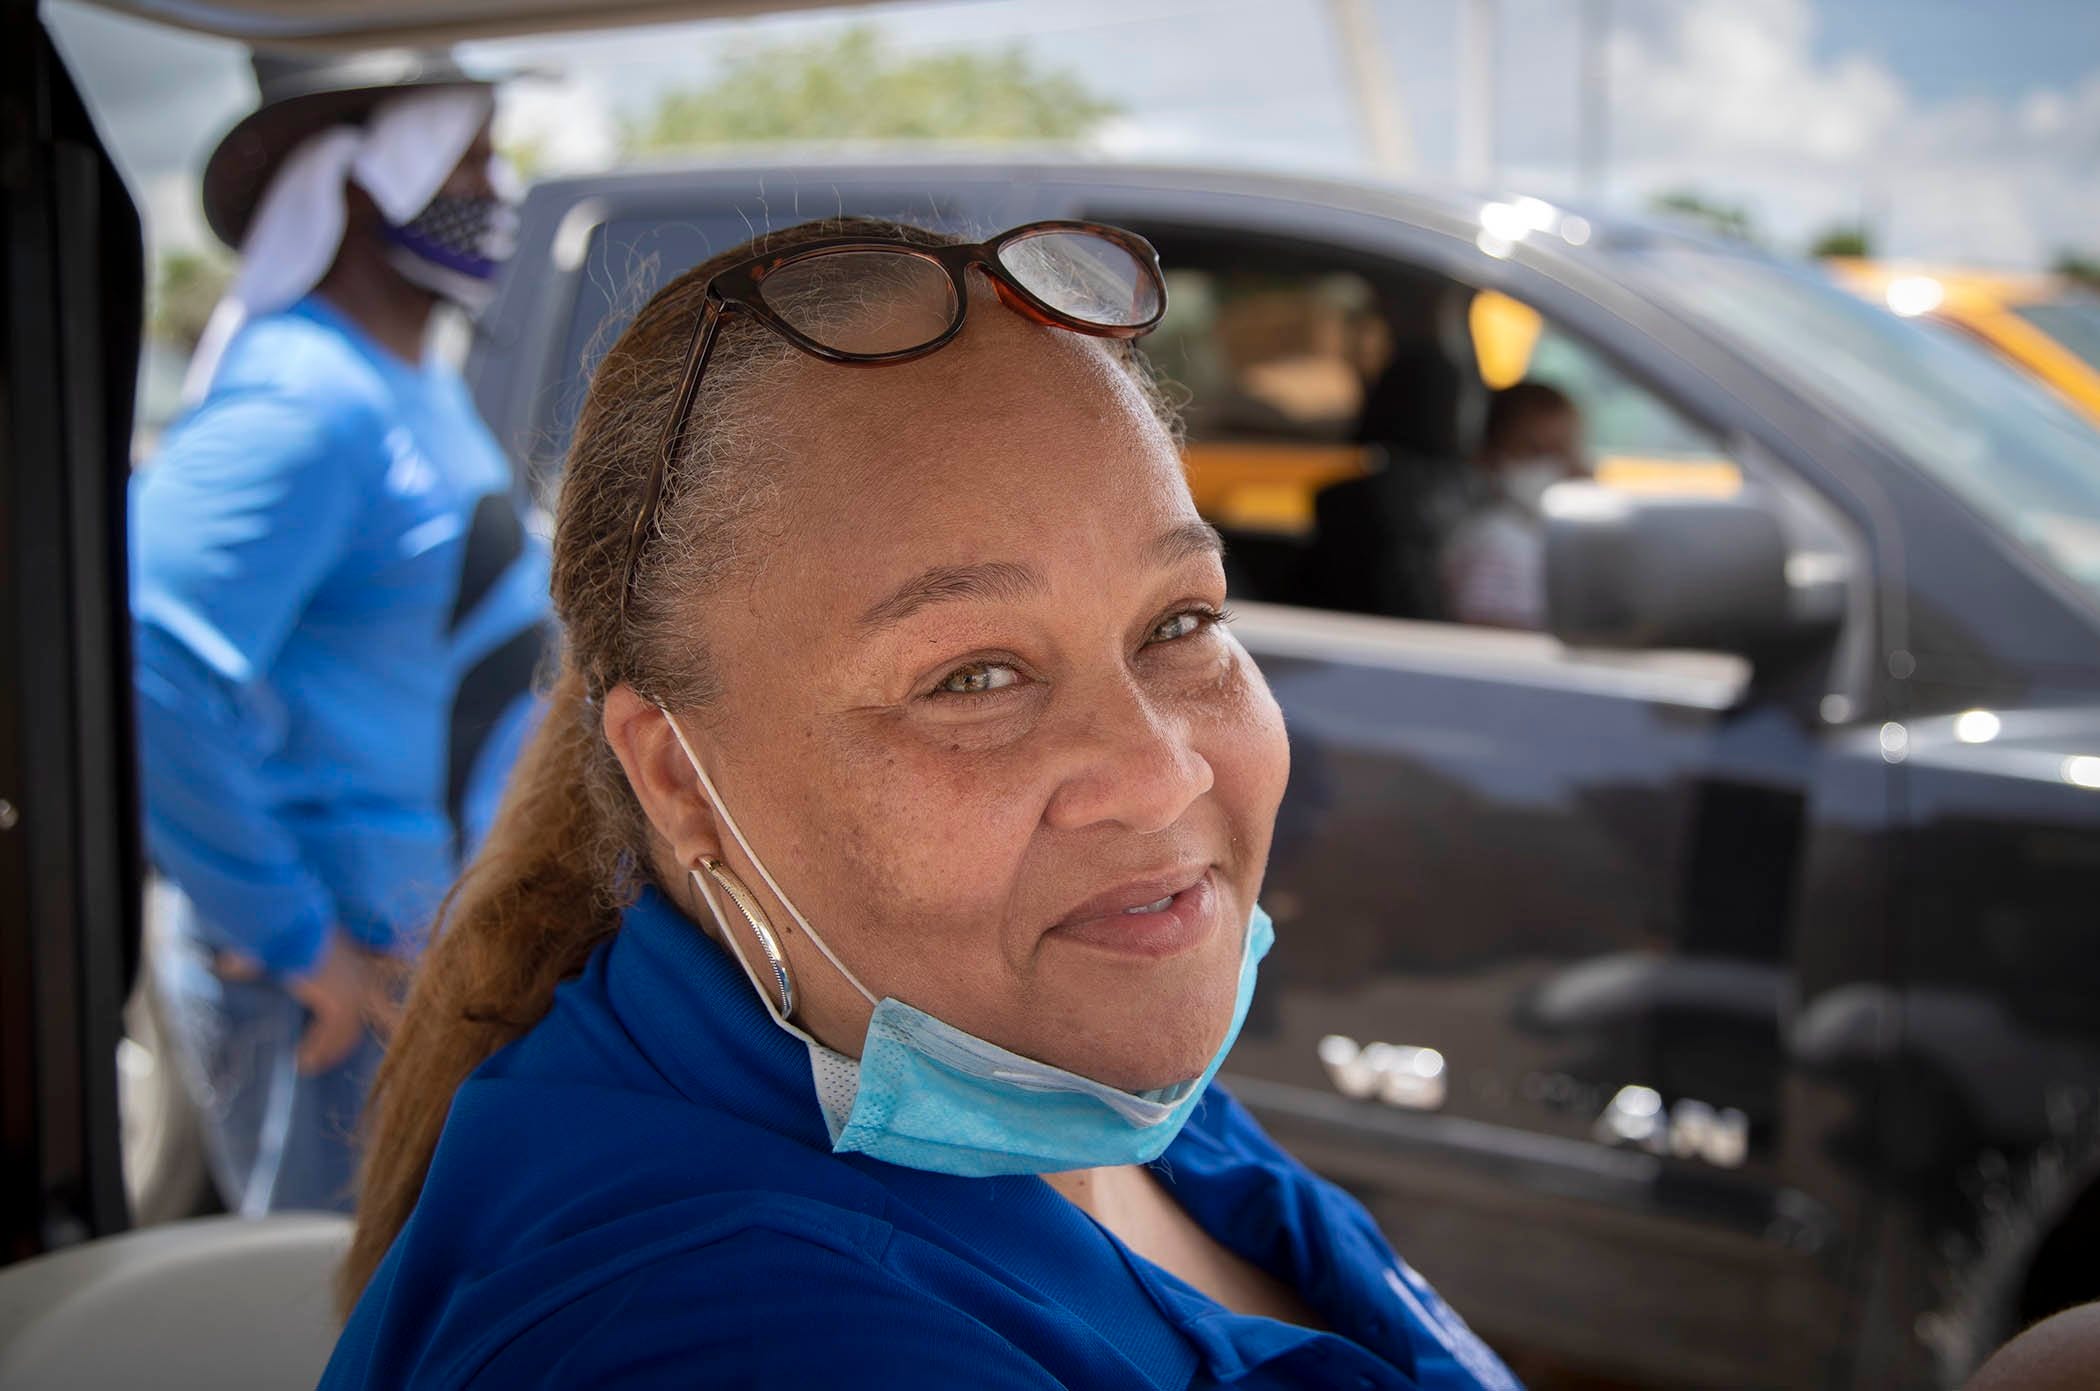 Tammy Jackson Moore helped start, the non-profit, Guardians of the Glades. Every Friday she coordinates in one of the tri-city area centers a food distribution and coronavirus testing site. She helped distribute 100,000 pounds of food in South Bay, July 24, 2020.